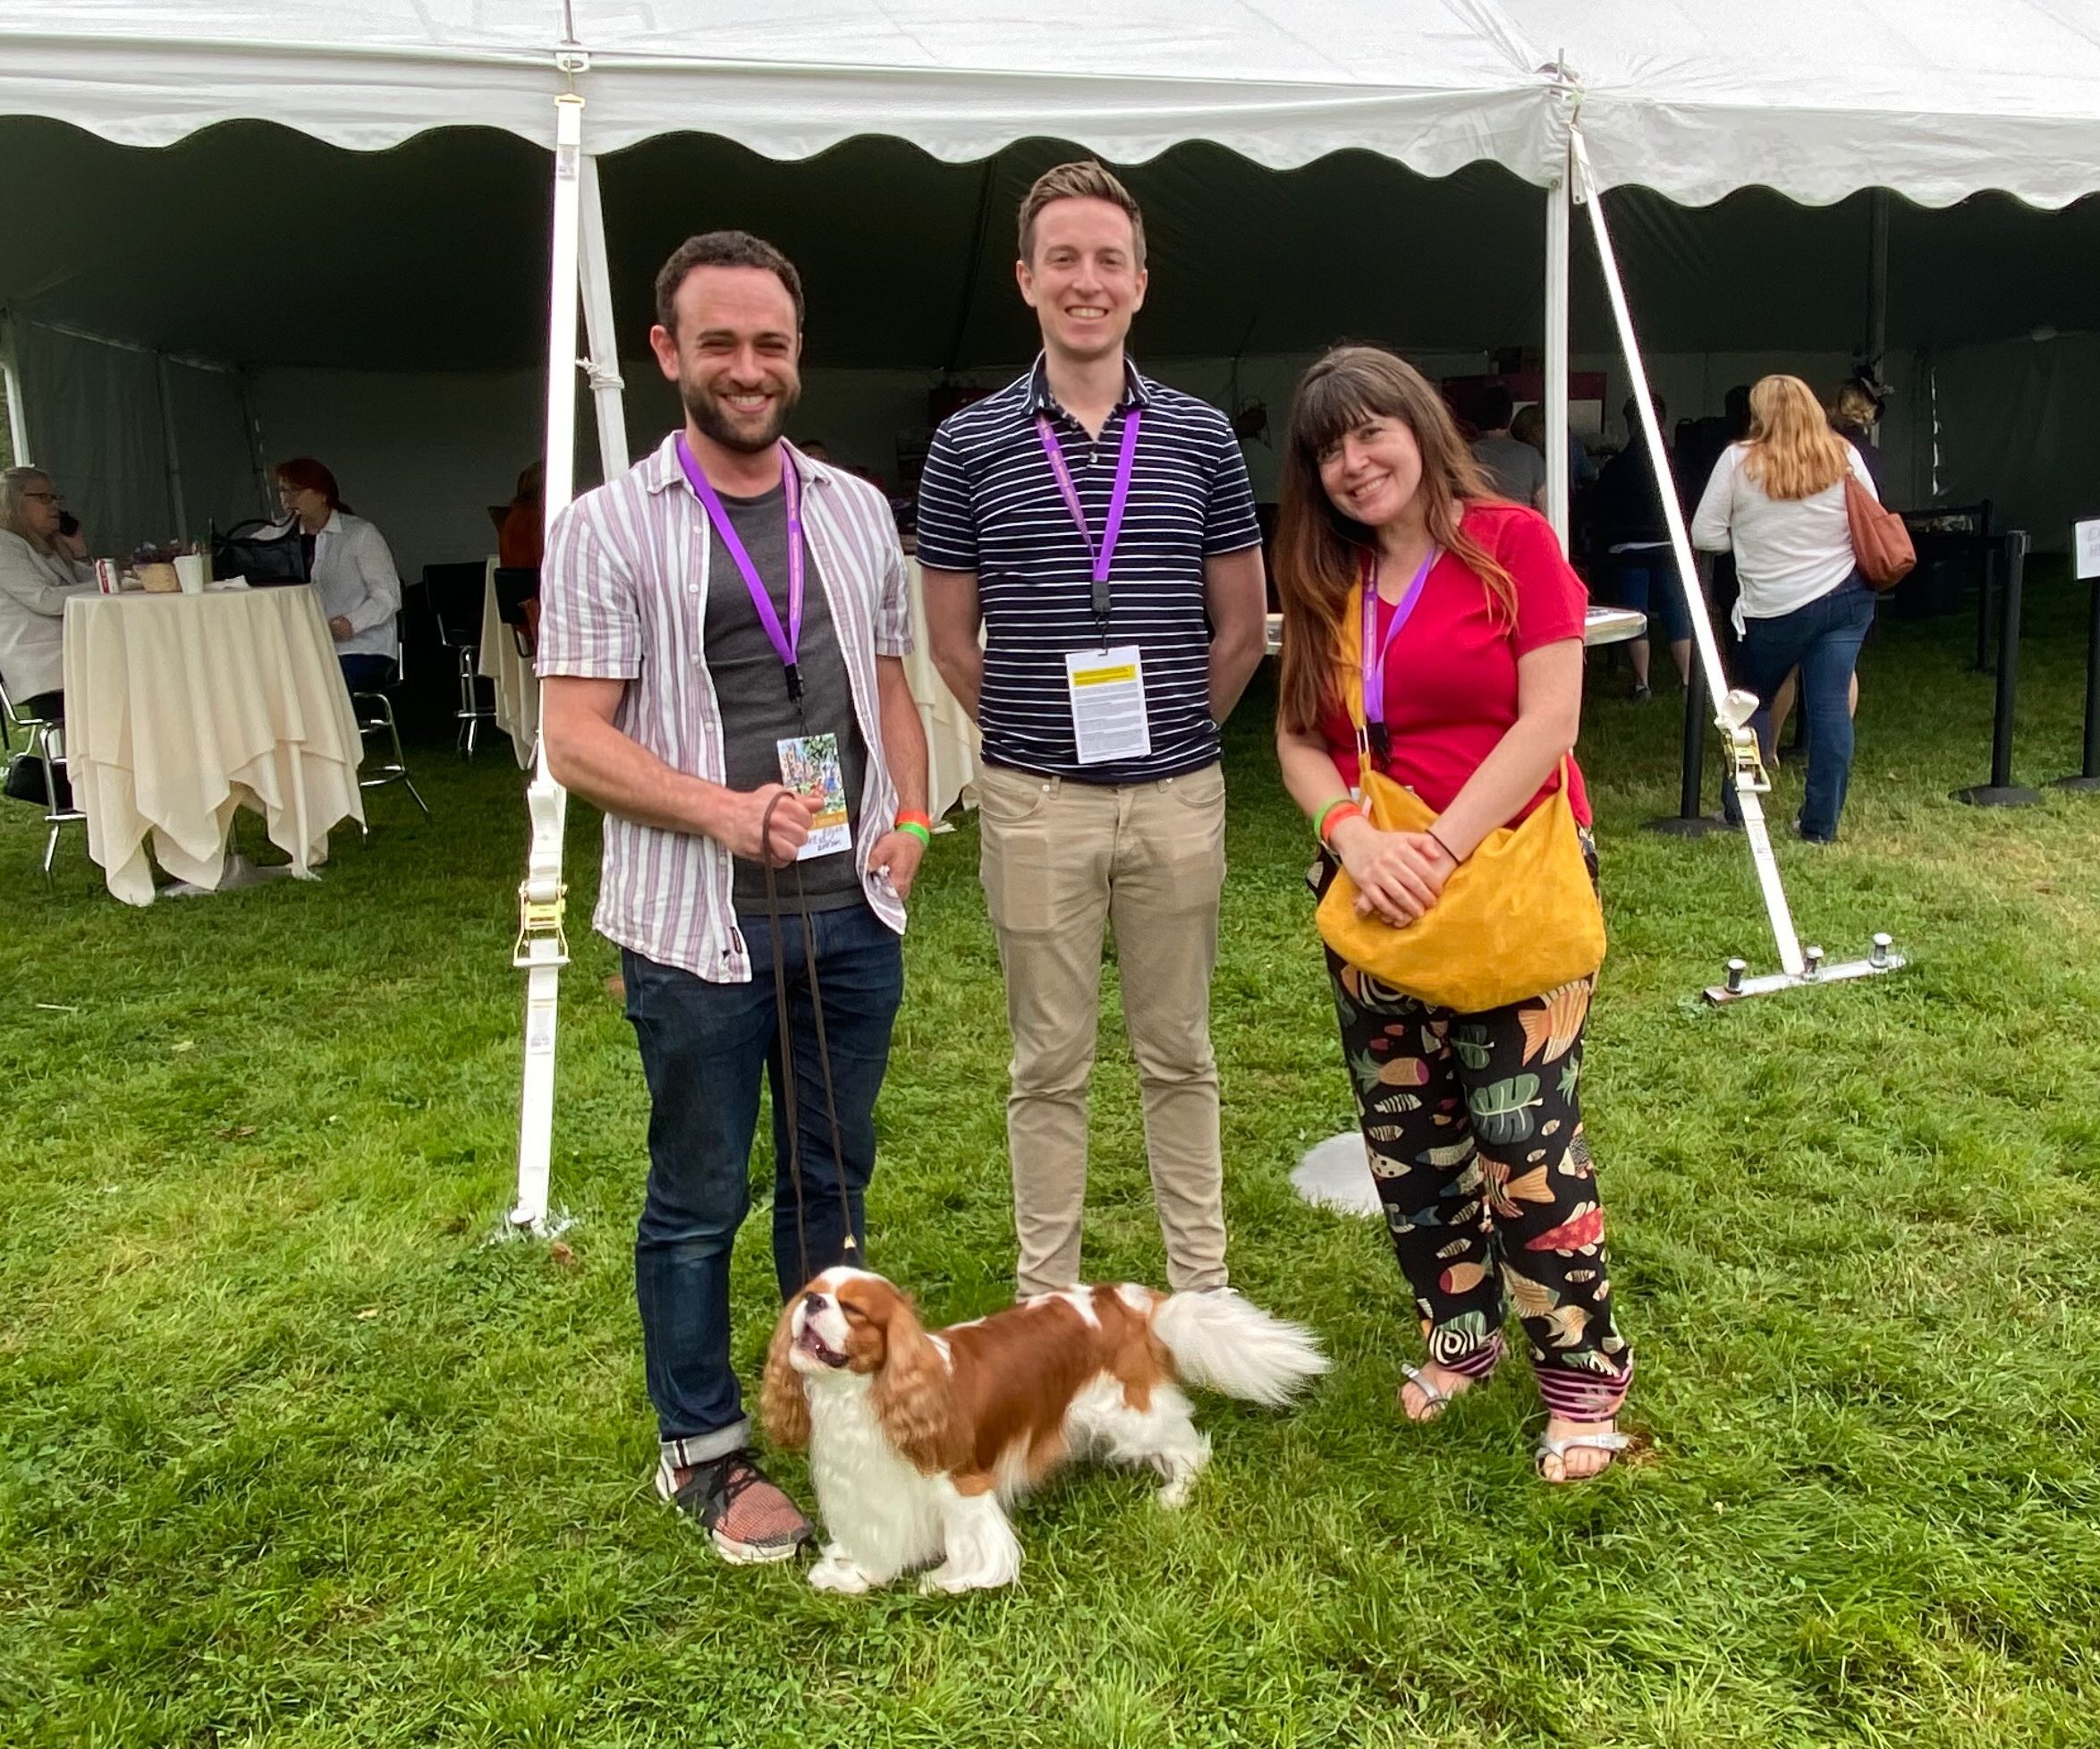 Clockwise, starting with the dog: Chester, the award-winning Cavalier King Charles Spaniel; Elijah Wolfson, TIME editor; Joey Lautrup, TIME video producer; Sarah Todd, Quartz journalist. (Courtesy of the author.)